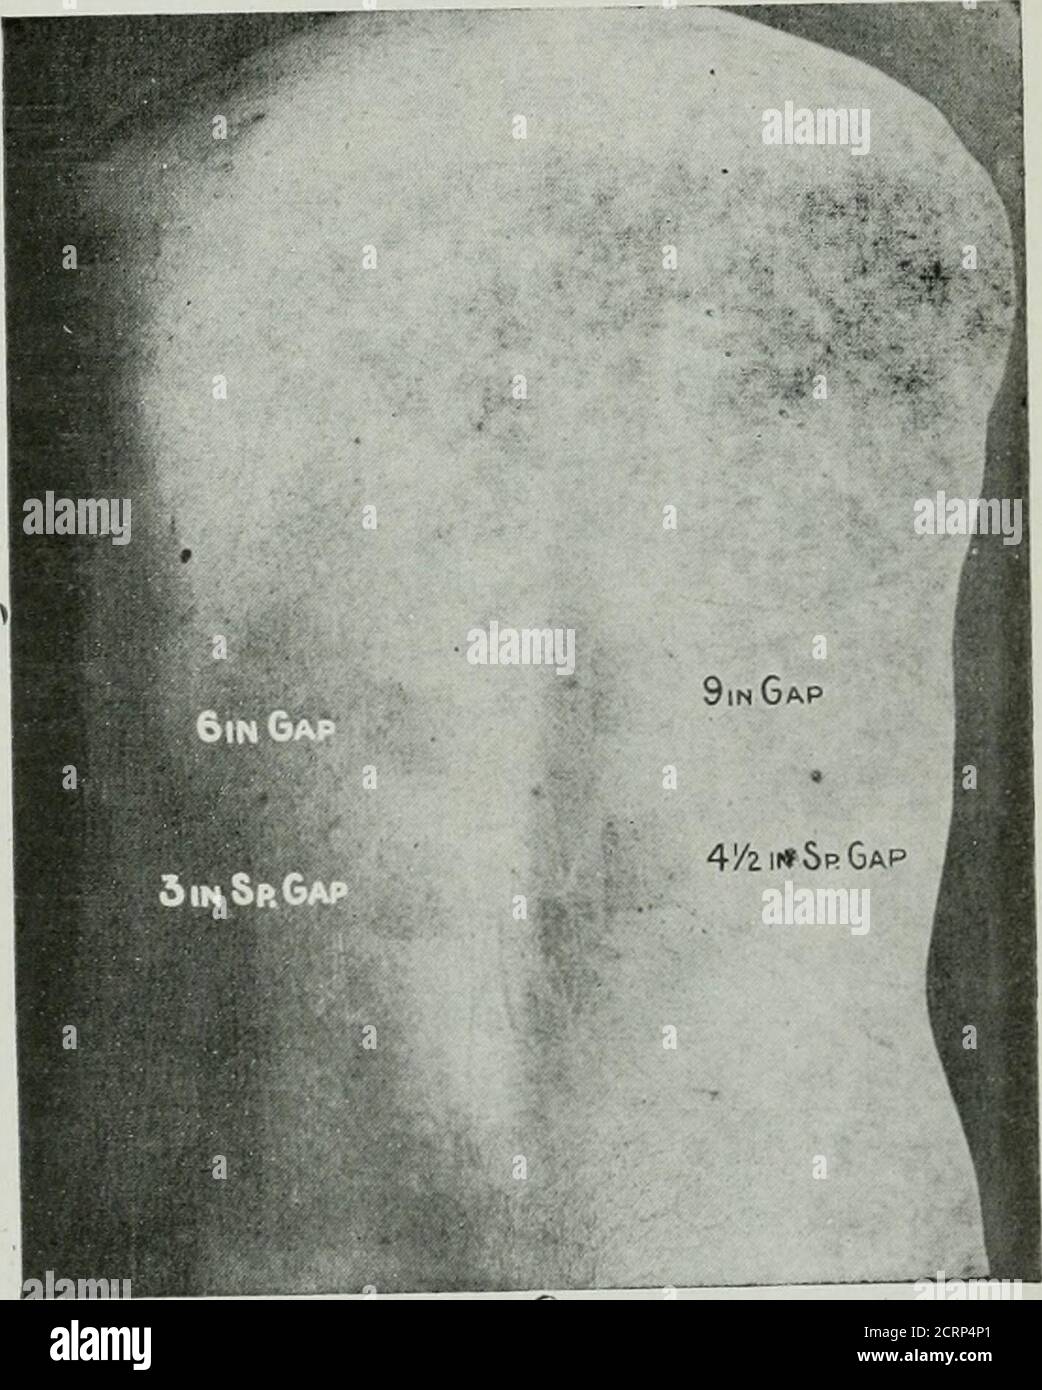 . The American journal of roentgenology, radium therapy and nuclear medicine . actors necessi-tated maintaining three of them constantthroughout the exposure, and varying theone under investigation. Thus, maintaining3 Sp G 3 M A for five minutes at a distanceof 8 inches produced an erythema in theusual time, ten to fourteen days, over an areaof the chest which happened to be coveredwith hair. The third week after exposure thehair came out and showed no signs of return-ing at the end of six months. Another areaof the chest was exposed and given 3 Sp G3 M A at a distance of 8 inches for four min Stock Photo